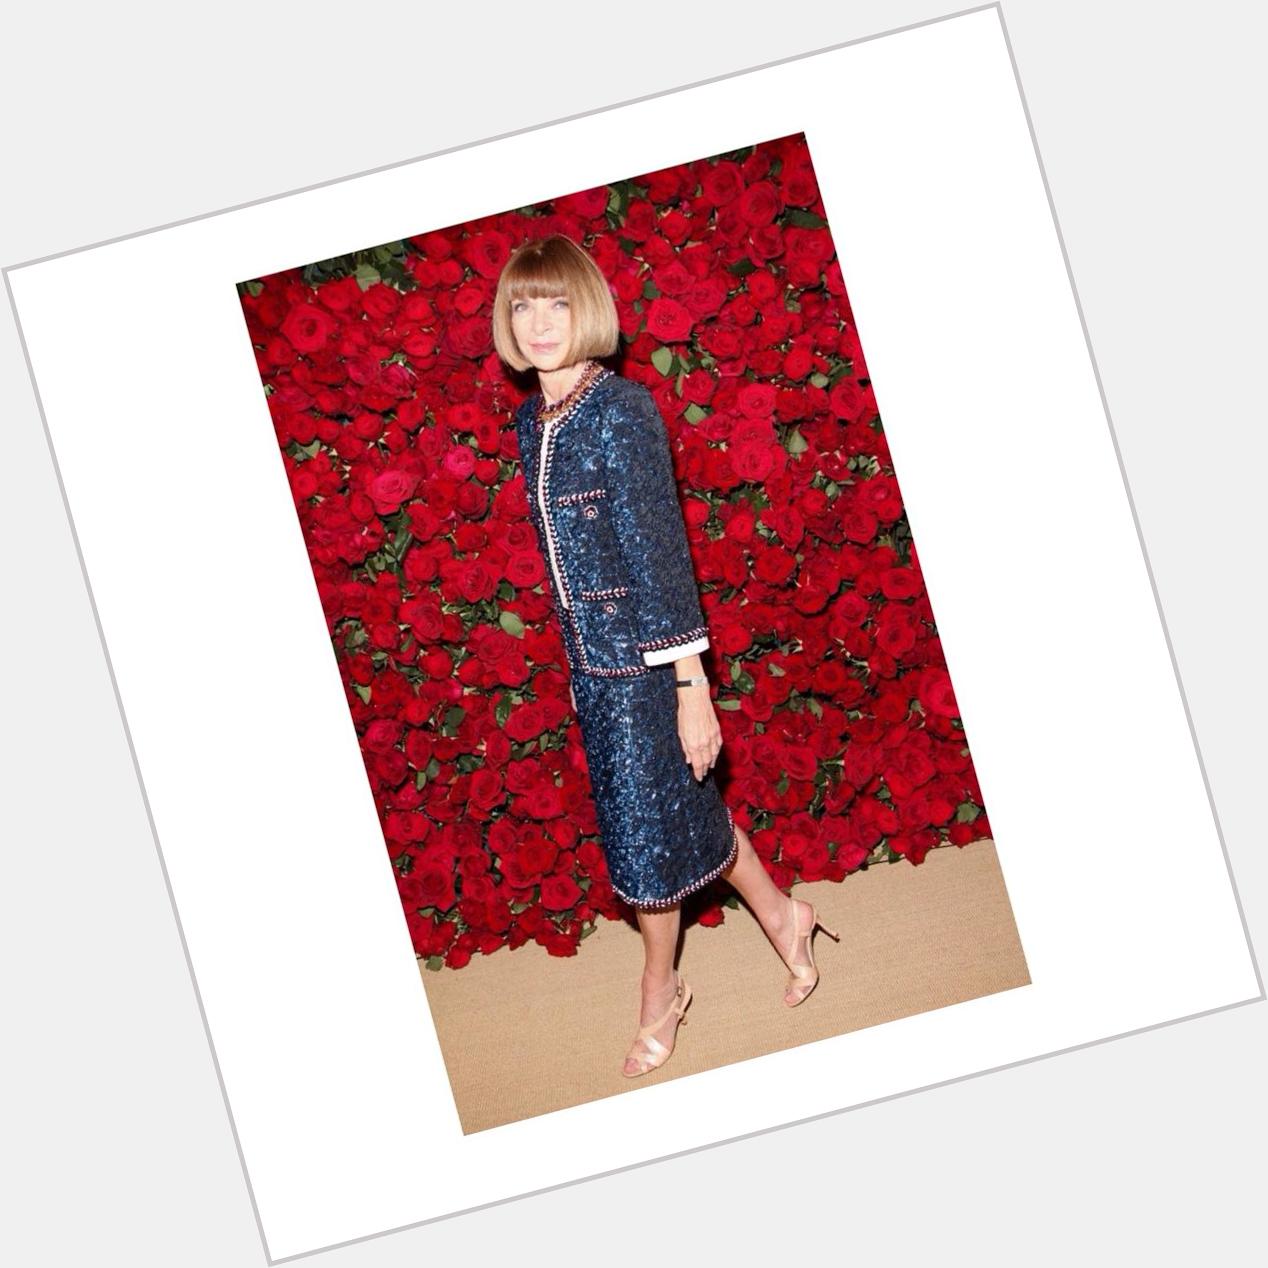 Fashion icon, extraordinaire, & legend. I can only dream to work for such a visionary. Happy Birthday Anna Wintour! 